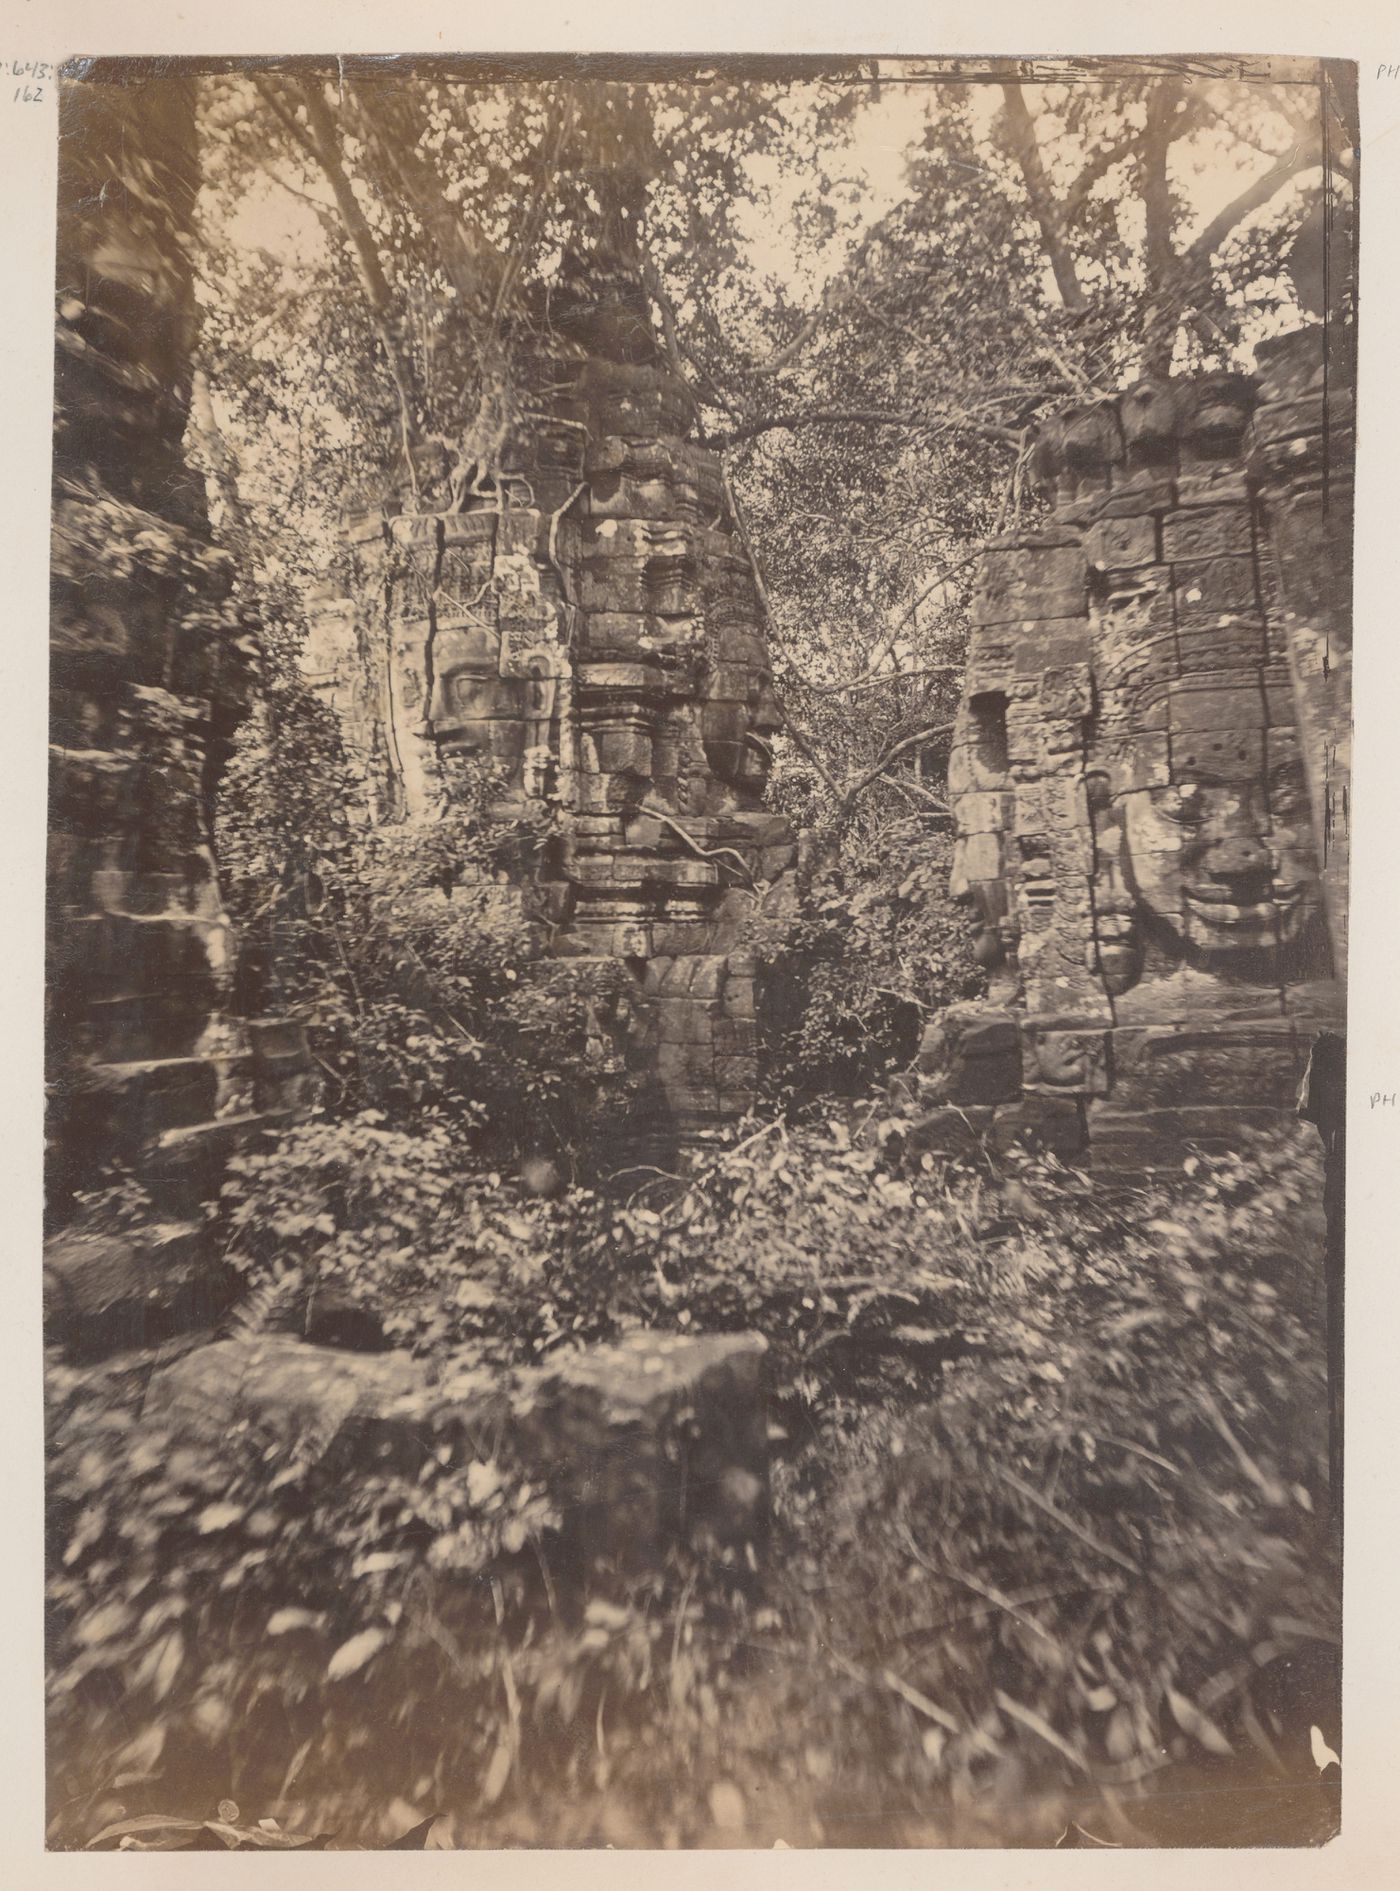 View of stone face towers on the Bayon Temple, Angkor, Siam (now in Cambodia)